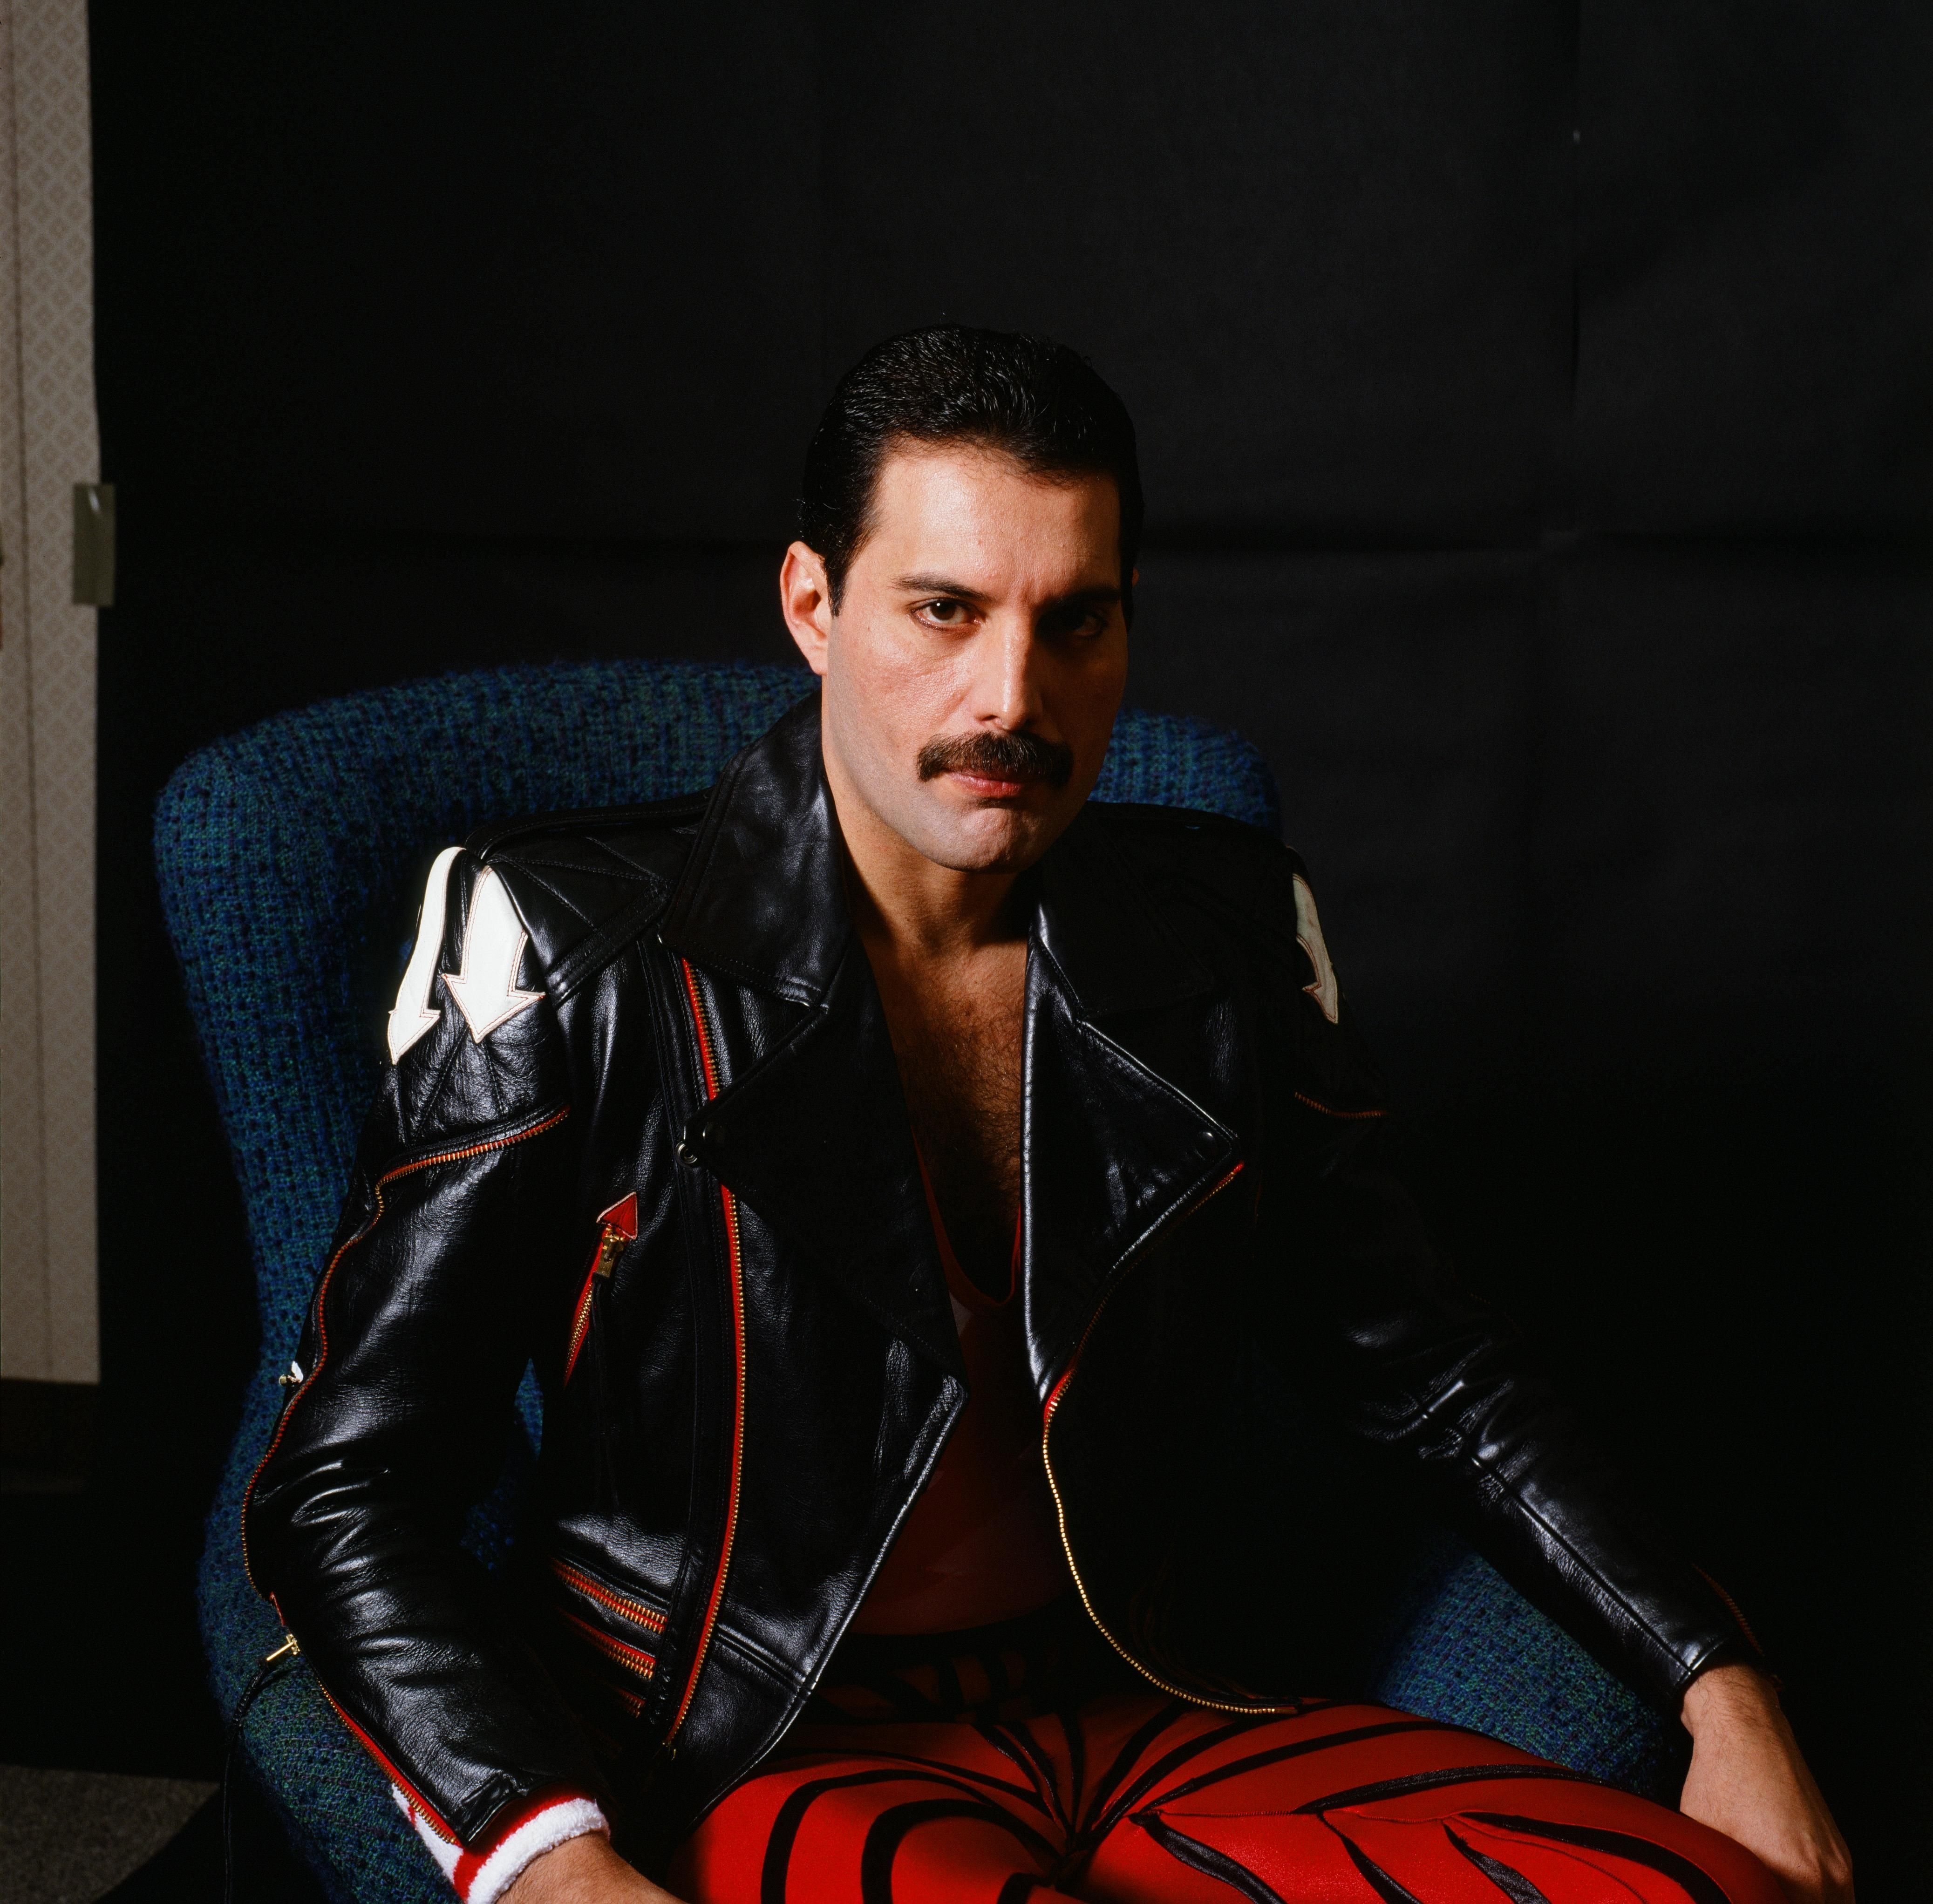 Freddie Mercury in a portrait for Japanese music magazine "Music Life" in Tokyo, Japan in 1985 | Photo: Koh Hasebe/Shinko Music/Getty Images